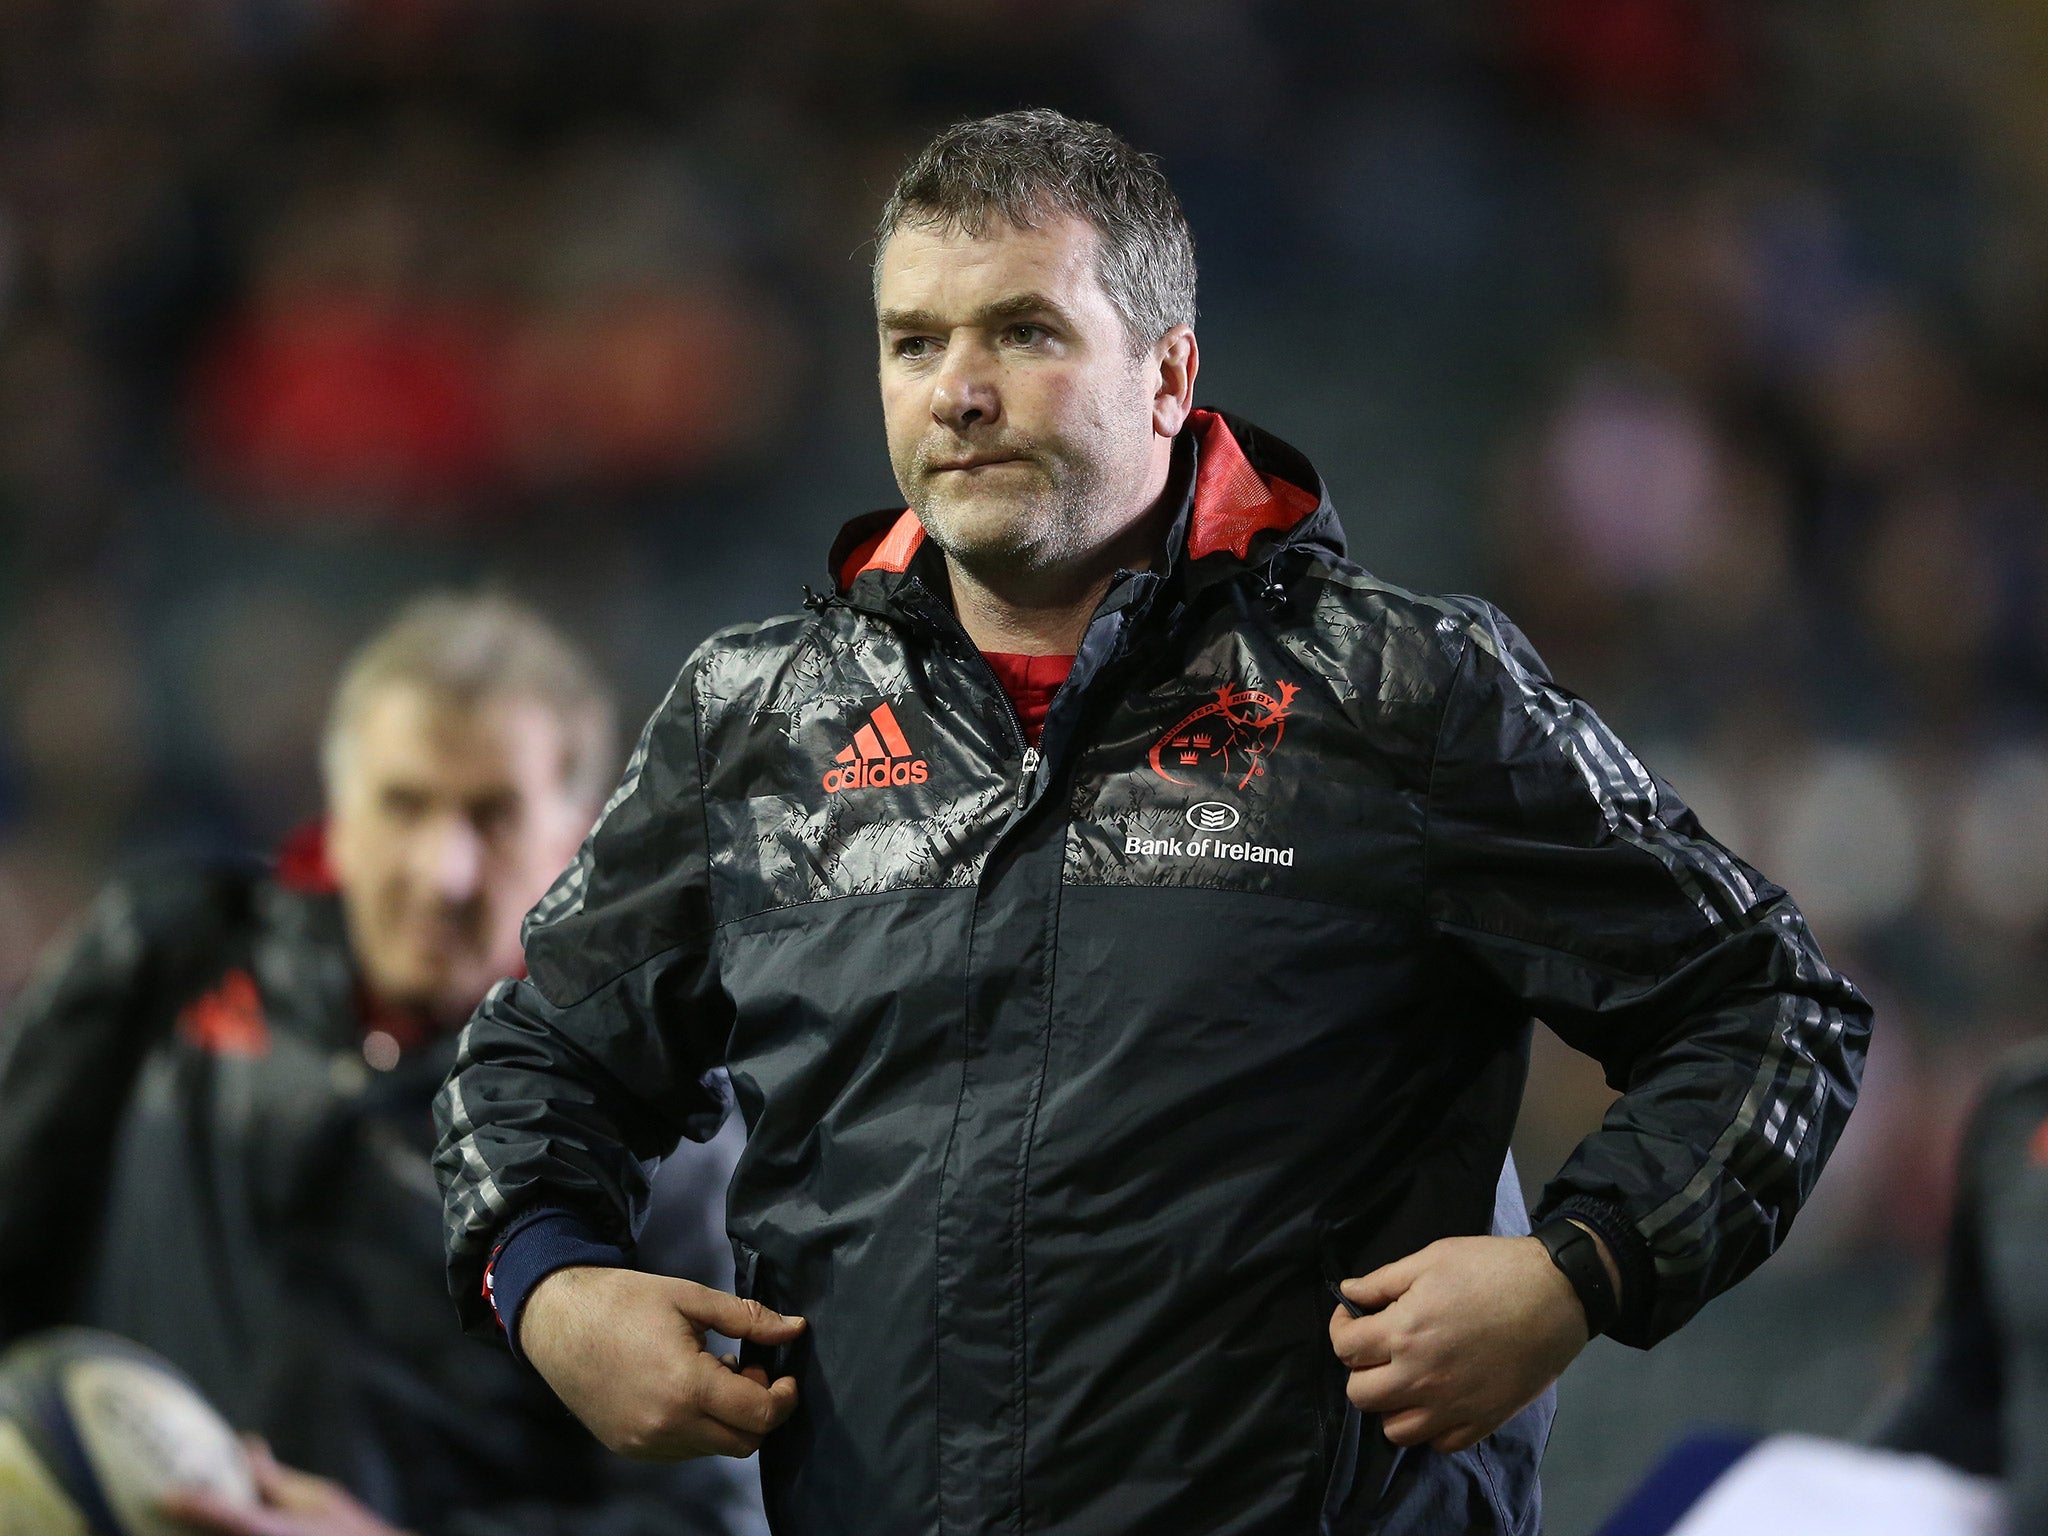 Anthony Foley died on Sunday after suffering a build-up of fluid on his lungs caused by a heart rhythm disorder